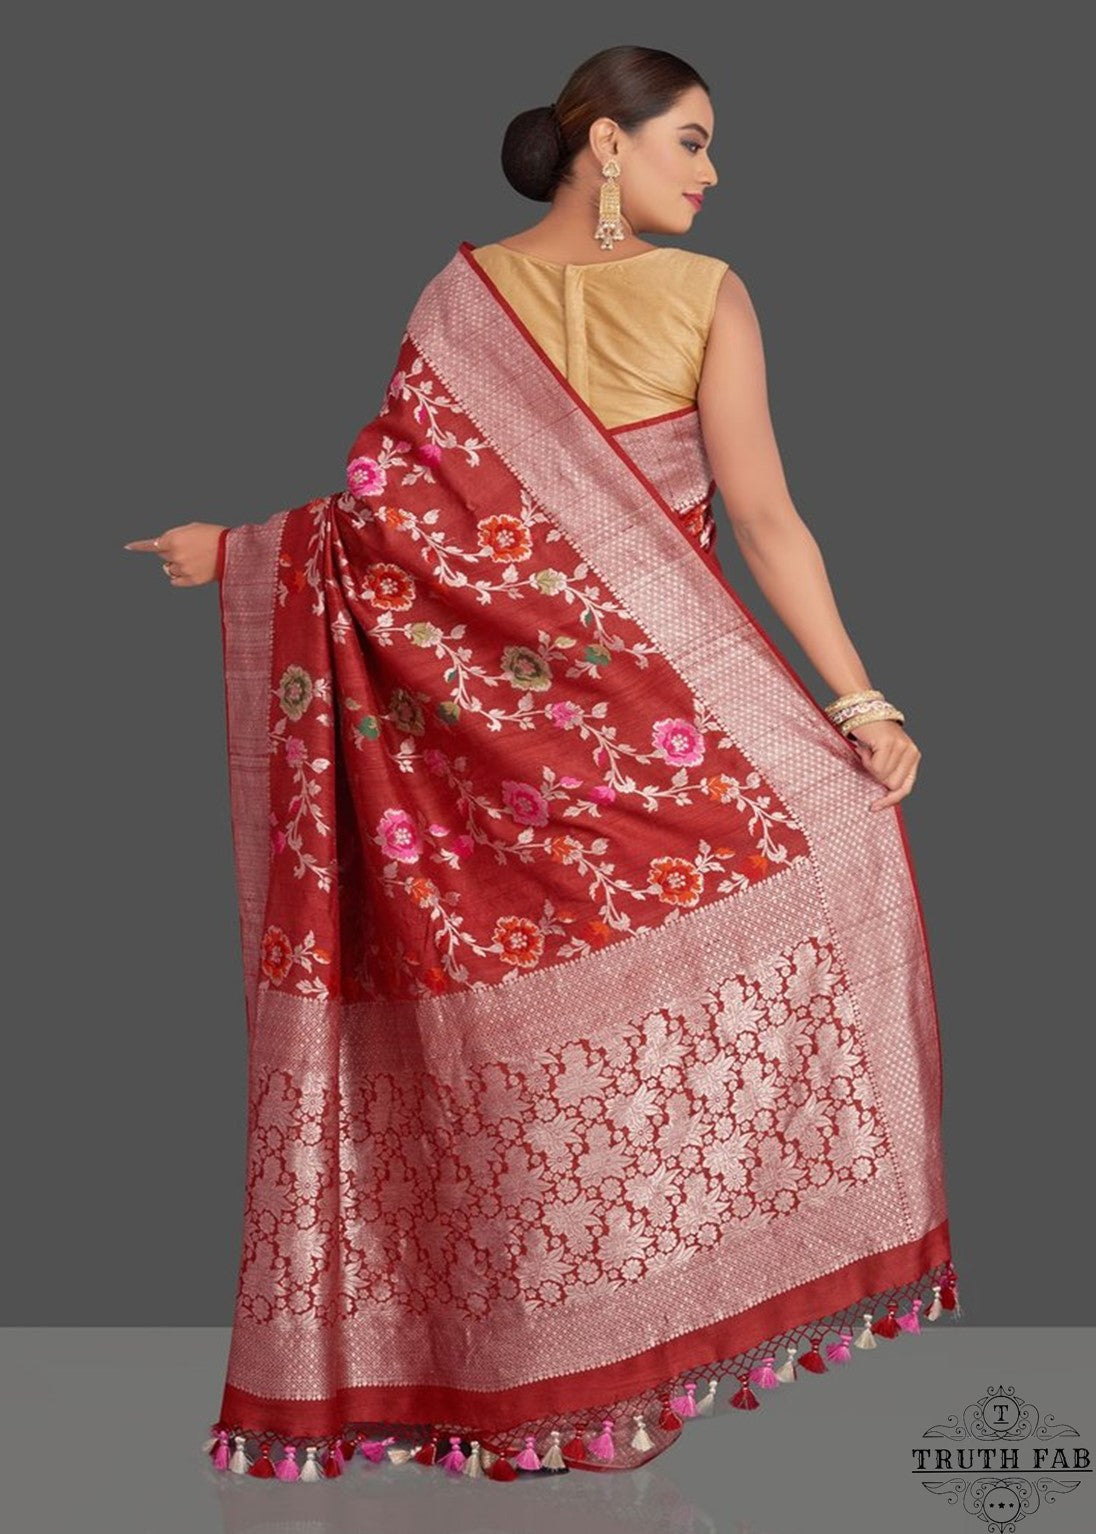 Georgette khaddi saree in red colour. Saree has a delicate water zari border with Gorgeous unique Motifs near pallu. The entire saree is beautiful with water zari meenakari design. It is an elegant traditional Banarasi saree. Irresistible wedding collection. This Mesmerising Saree is a Combination of Elegance and Style.